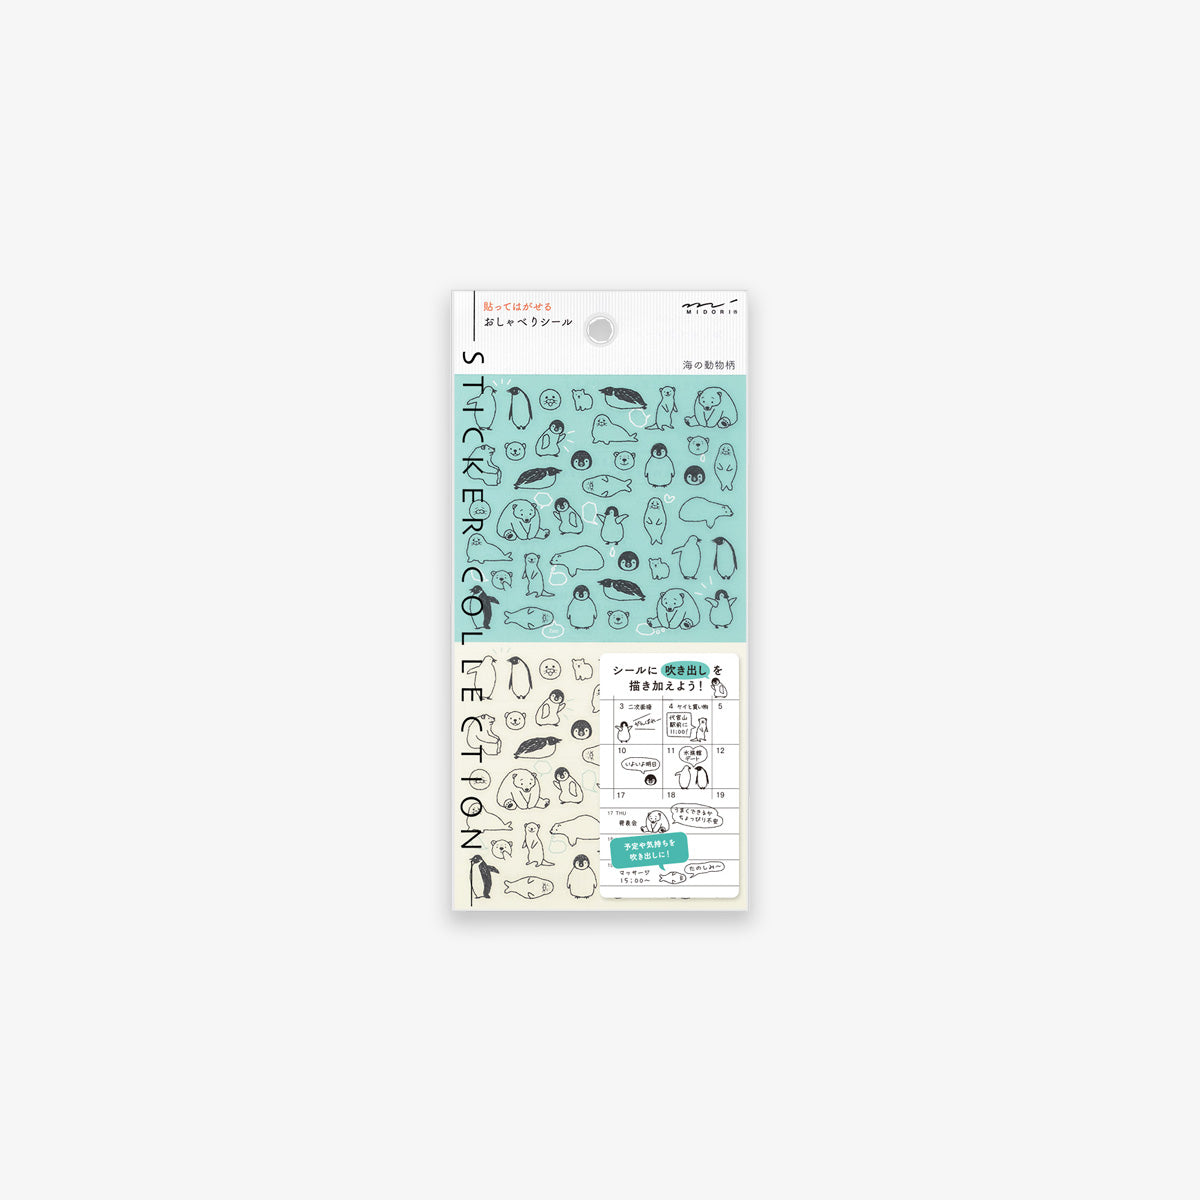 DIARY STICKERS // CHAT SEA CREATURES